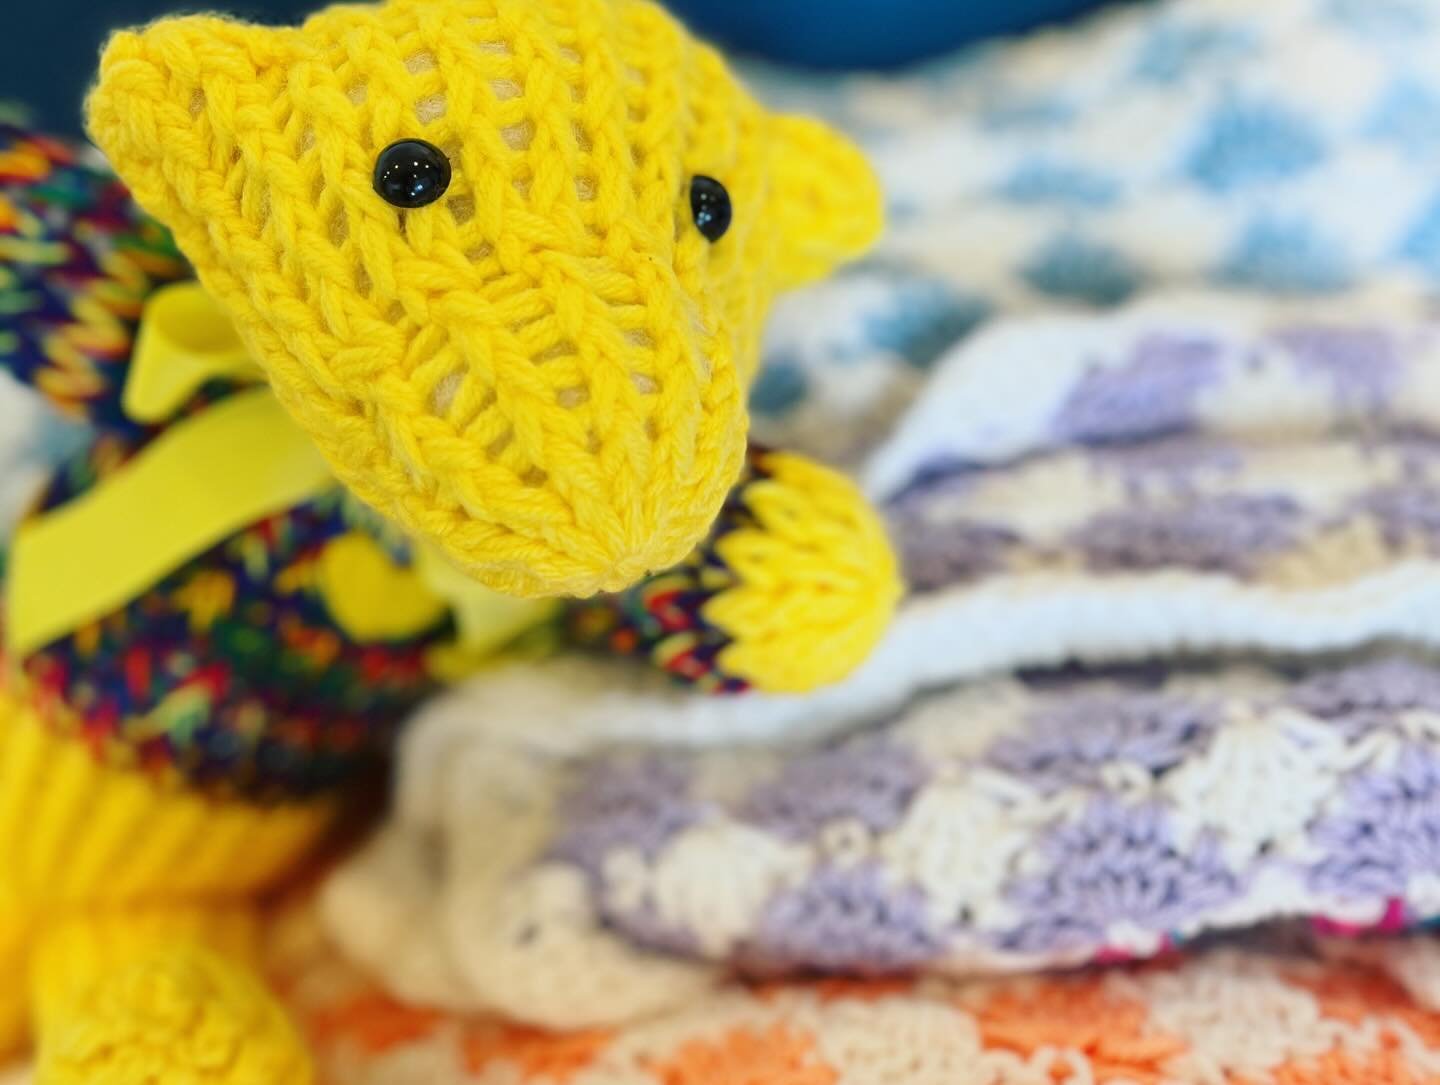 Today we are putting out a cheery batch of quilts and stuffed animals for children to take home after visiting KIDS Center. Several wonderful groups sew and crochet quilts and afghans, and then donate them to bring comfort to a child! ❤️